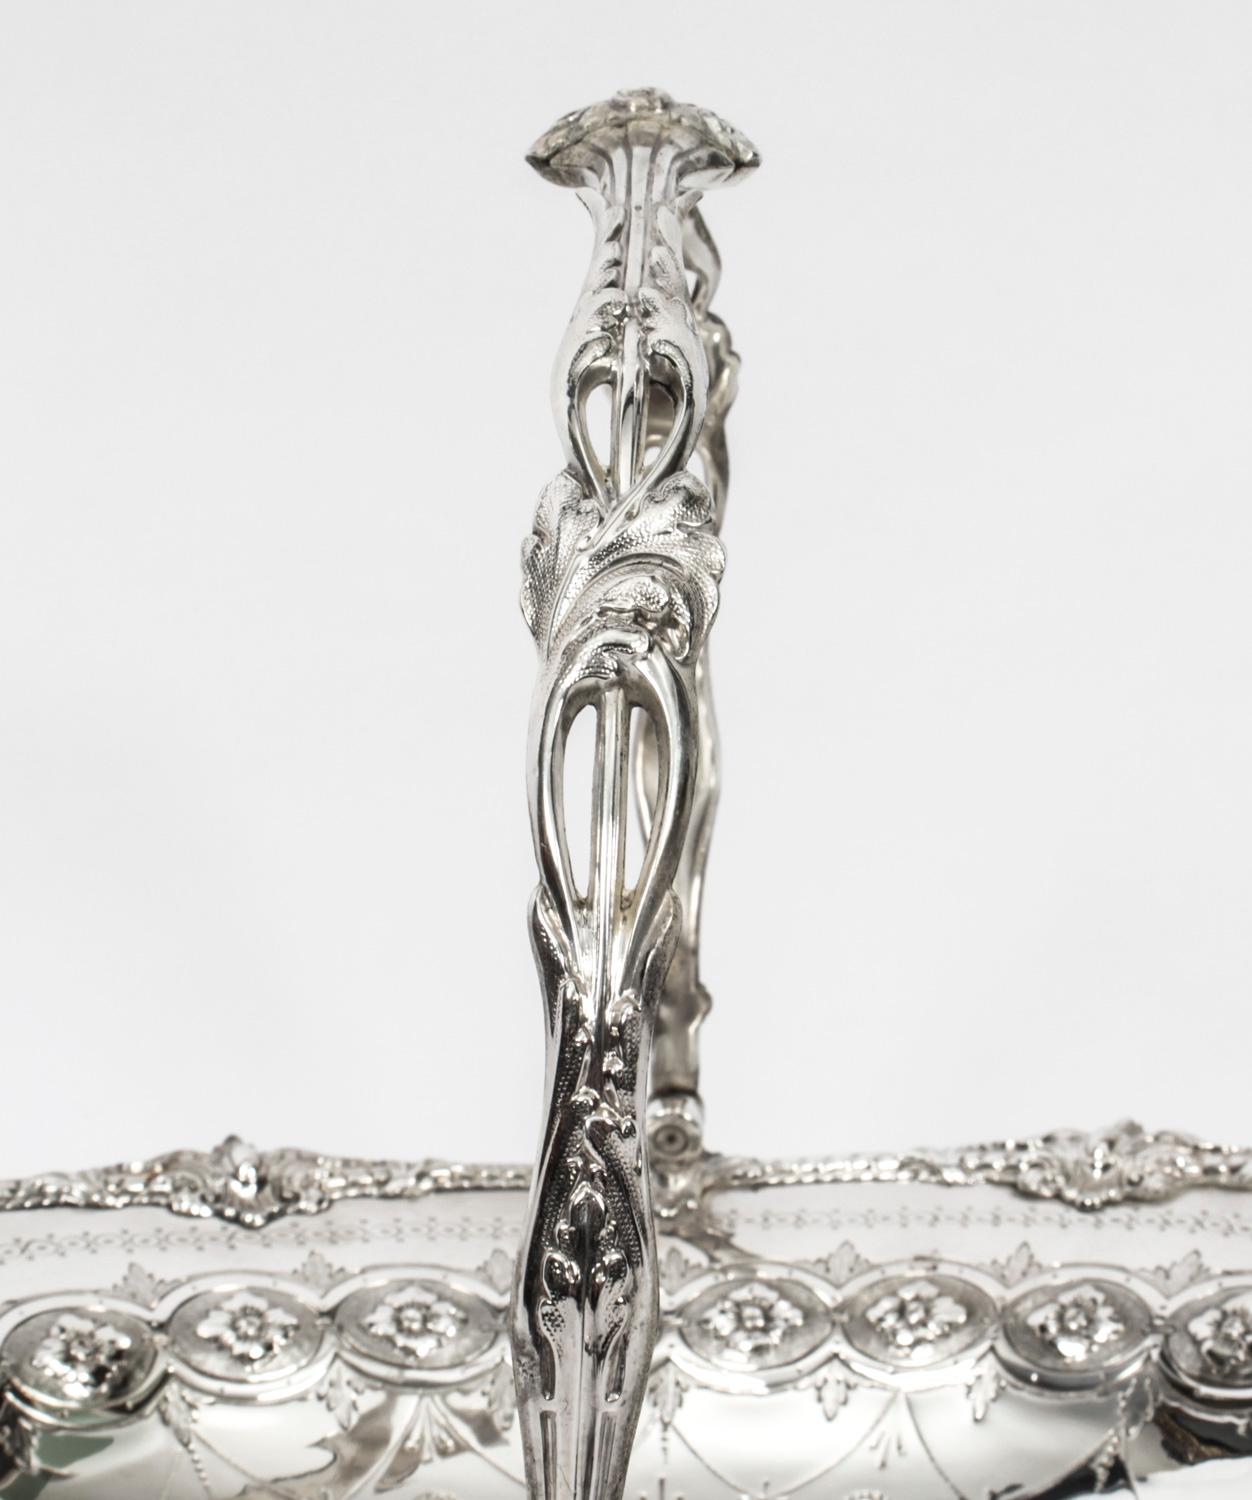 Victorian Antique Silver Plated Fruit Basket by Henry Atkins & Co 19th C